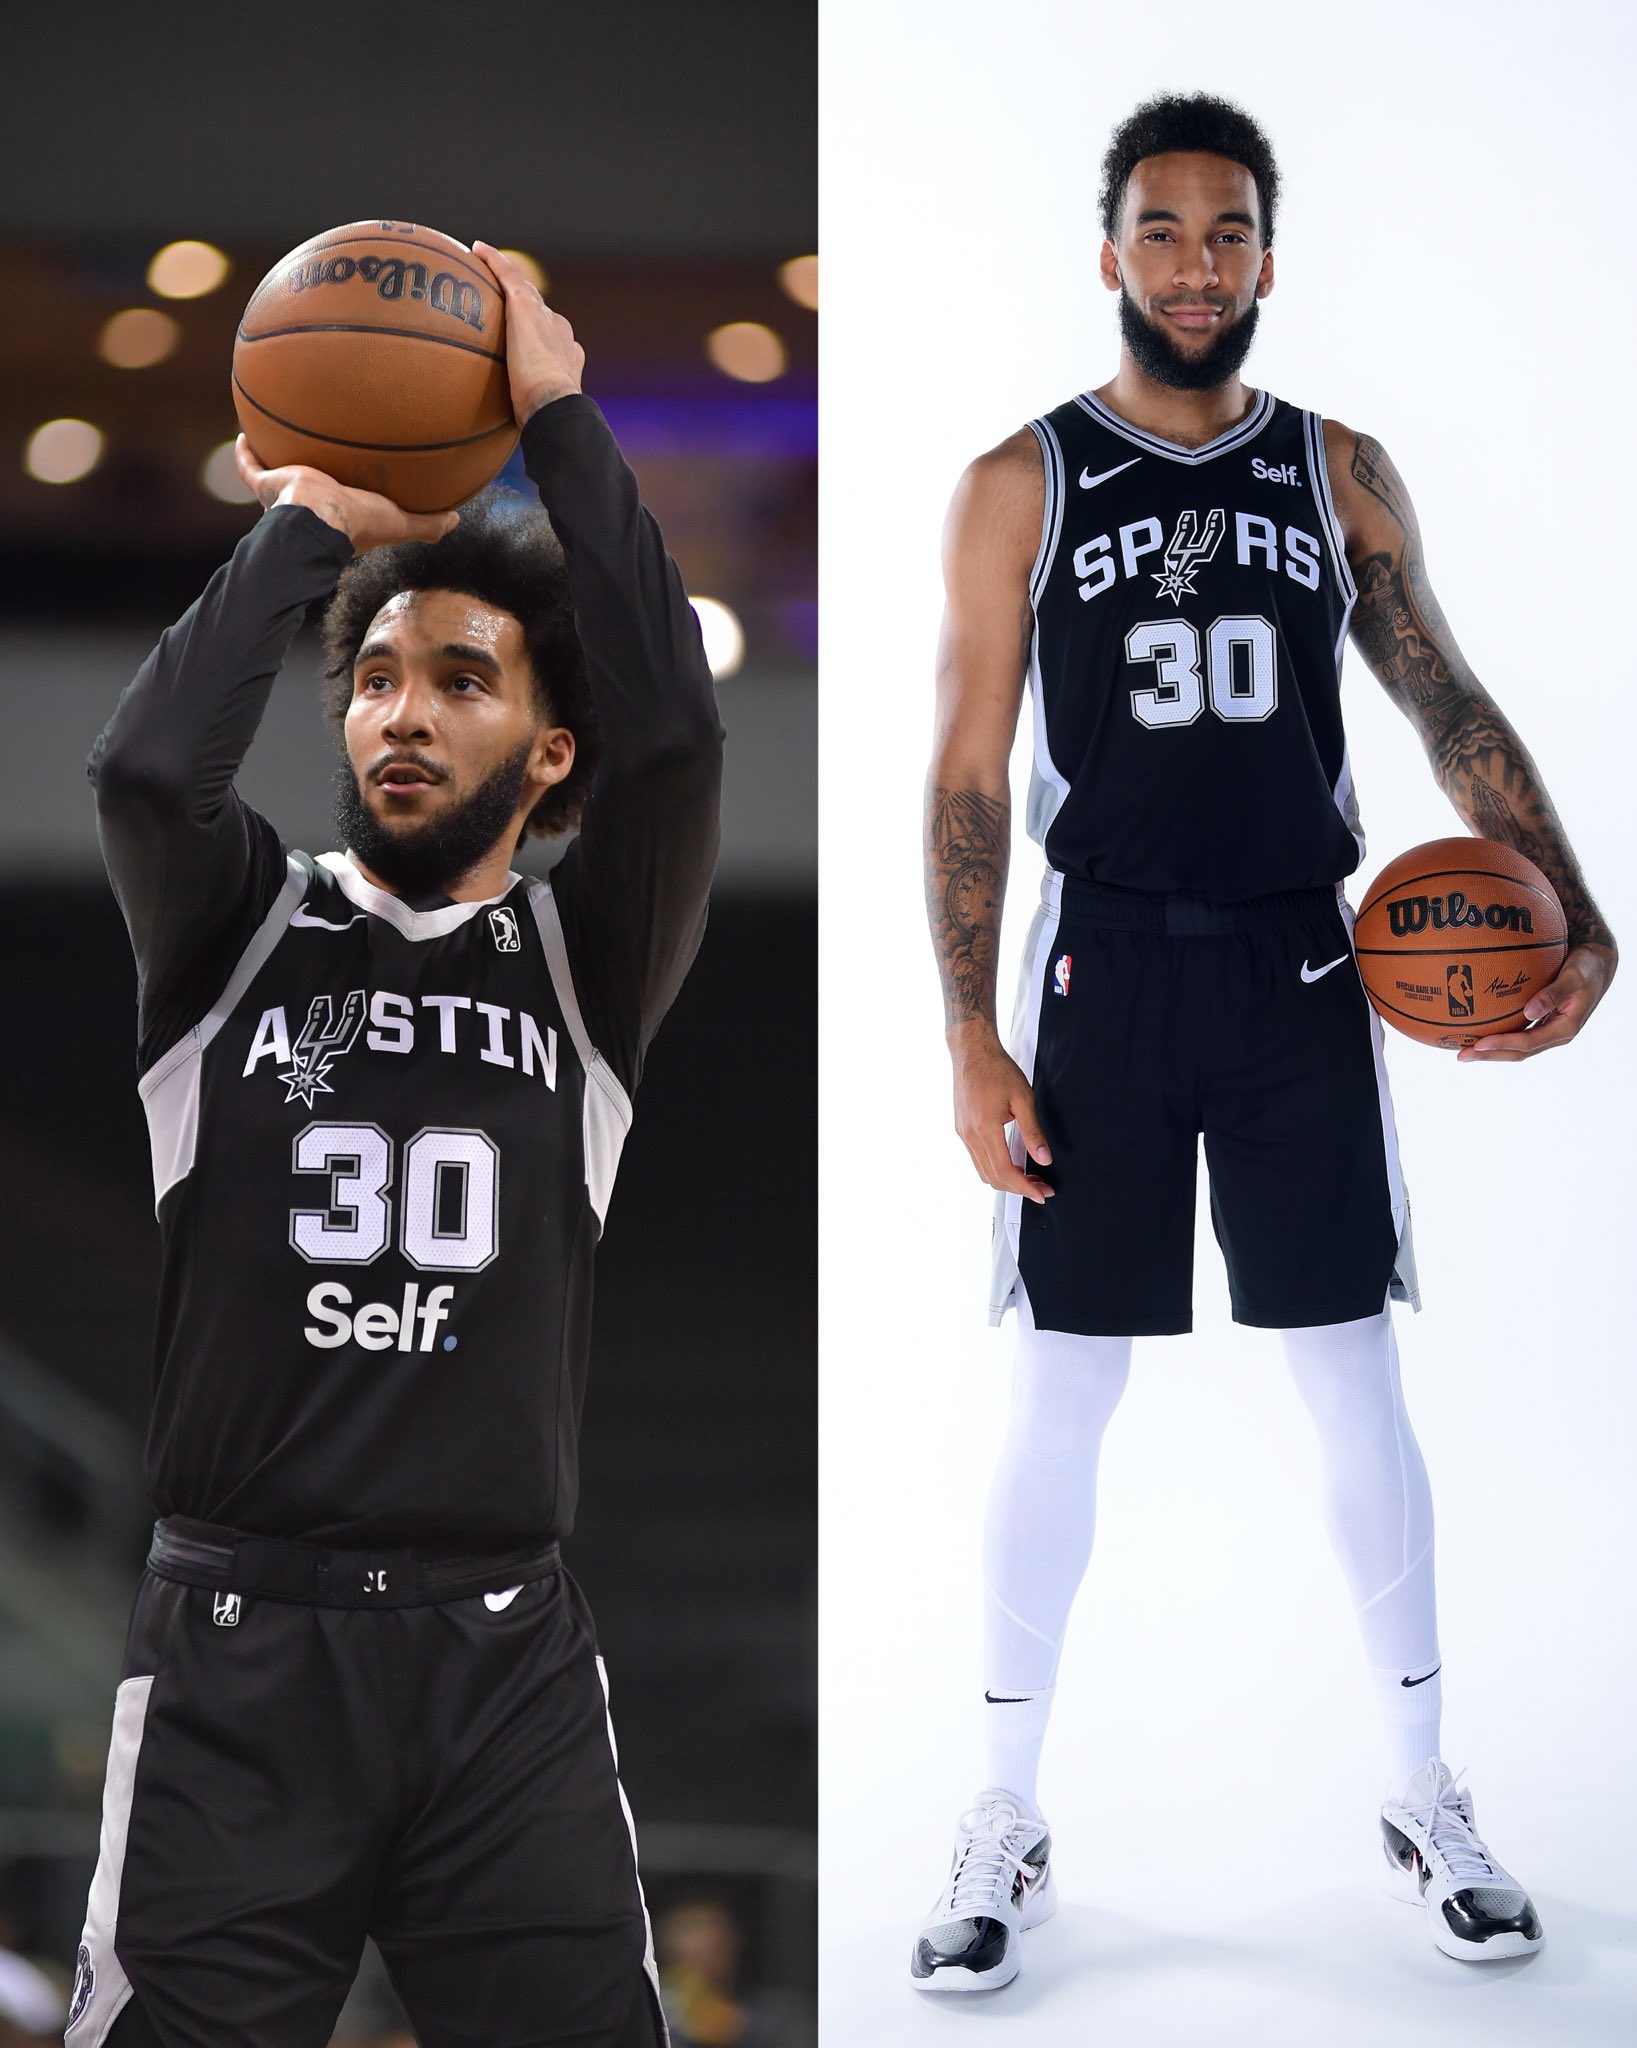 Austin Spurs on X: 🚨THE ANNOUNCEMENT YOU HAVE BEEN WAITING FOR